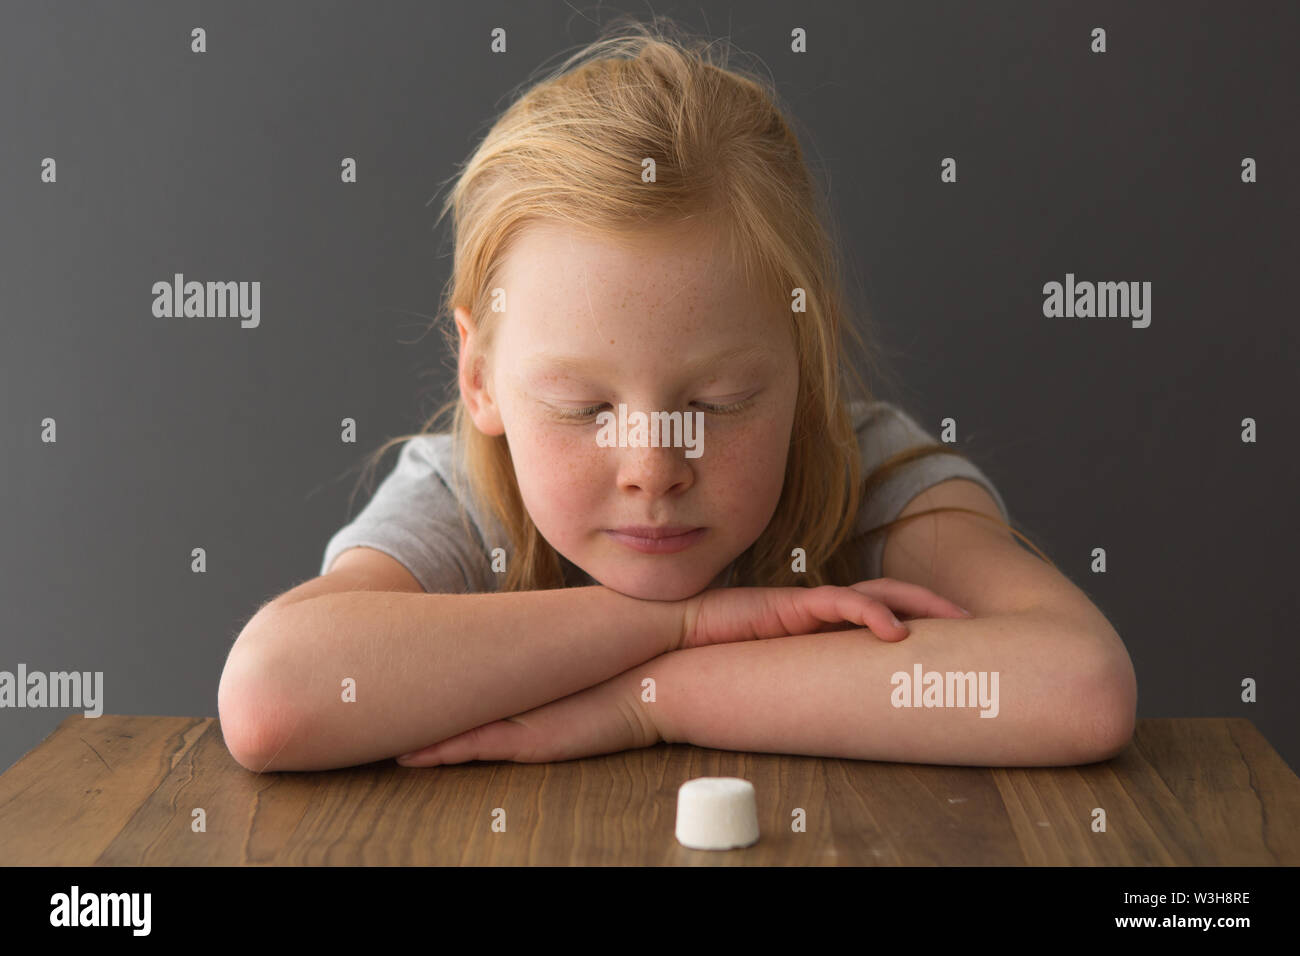 A young girl looks at a single marshmallow, attempting the marshmallow test Stock Photo